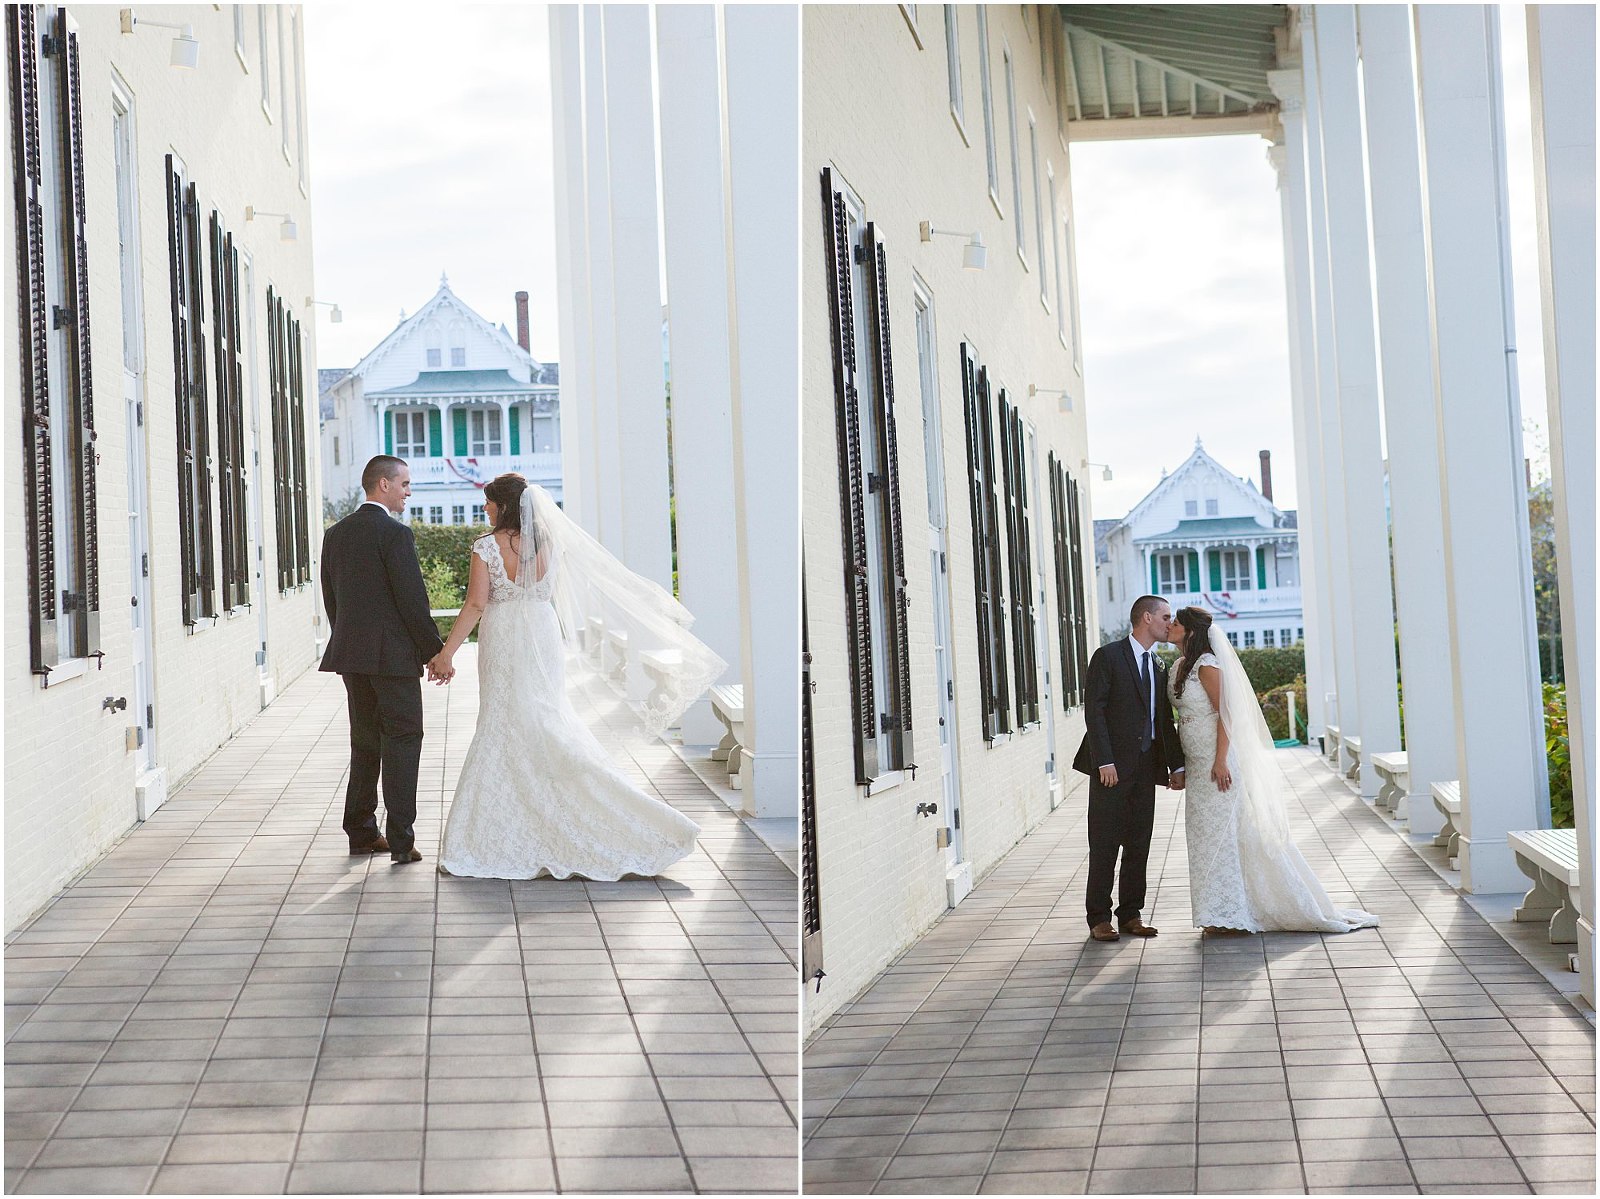 Great Cape May Wedding Venues of the decade Learn more here 